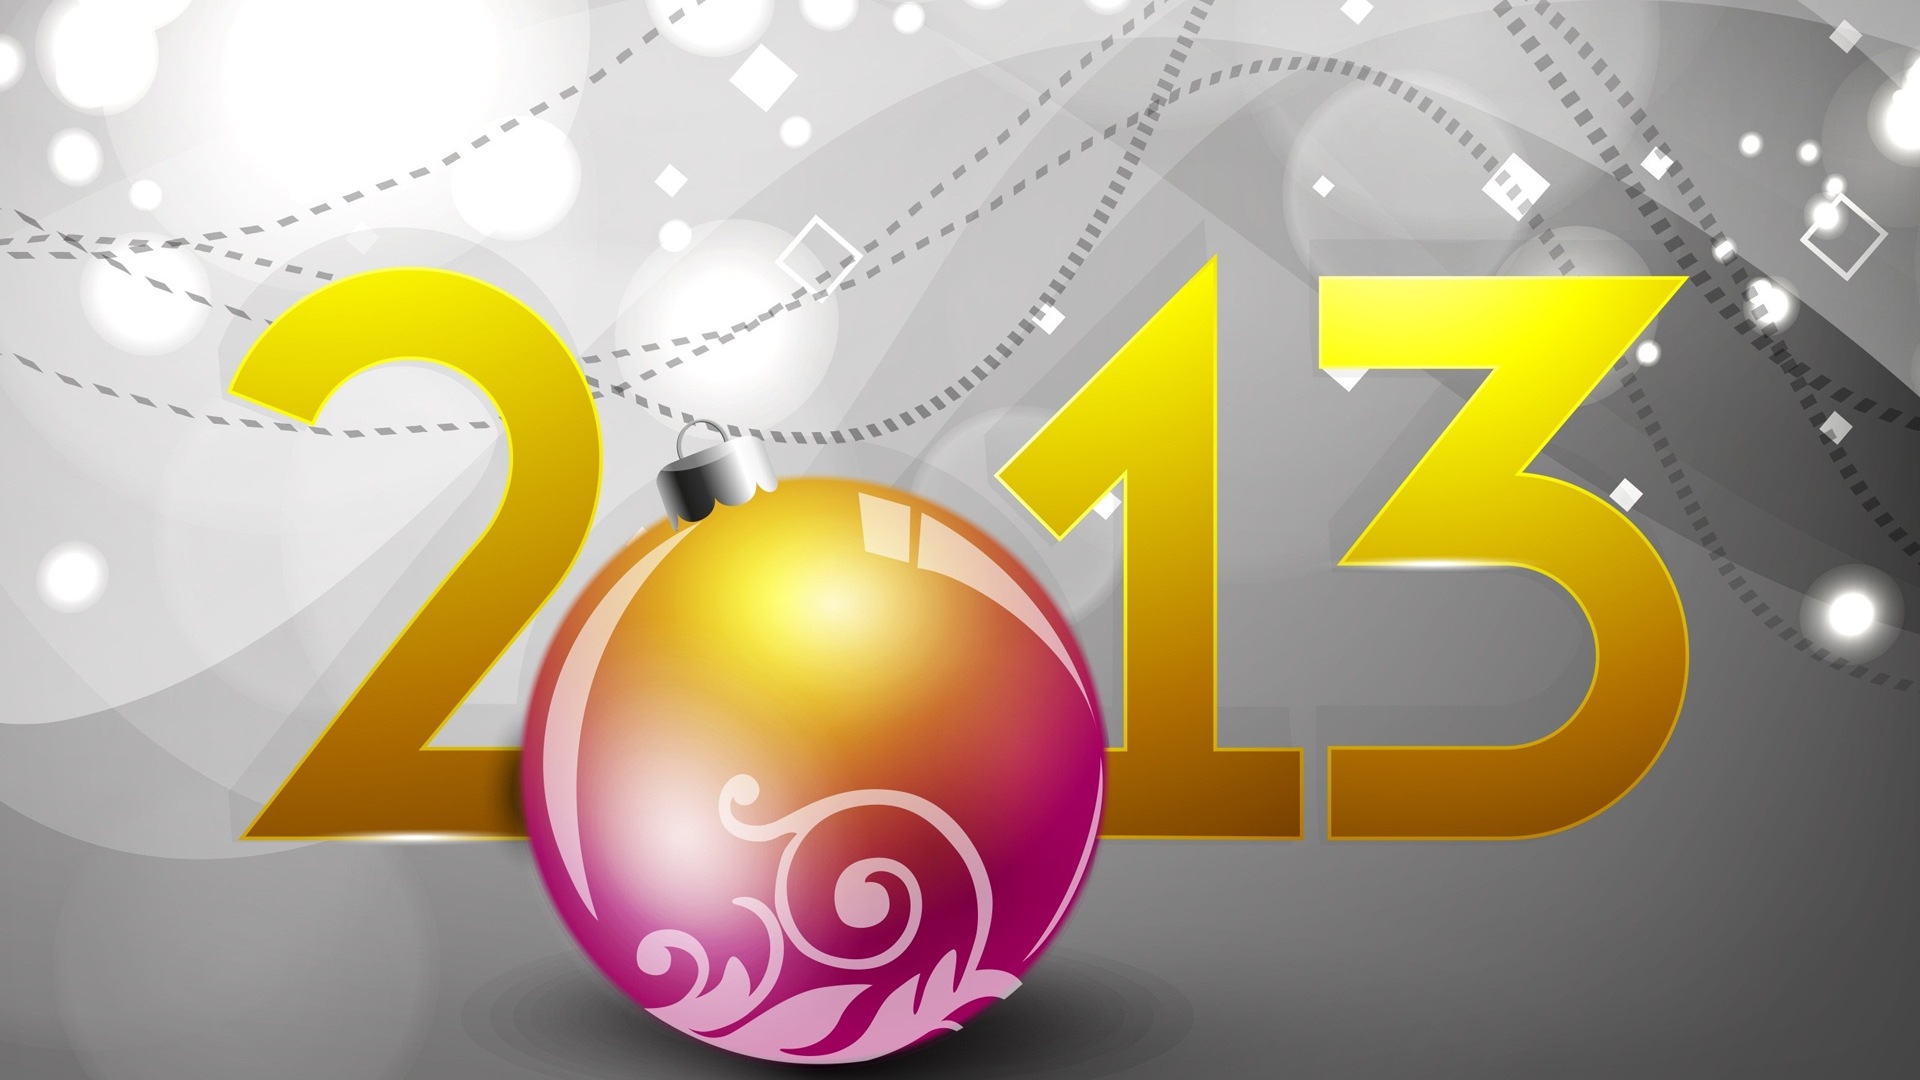 2013 Happy New Year HD wallpapers #4 - 1920x1080